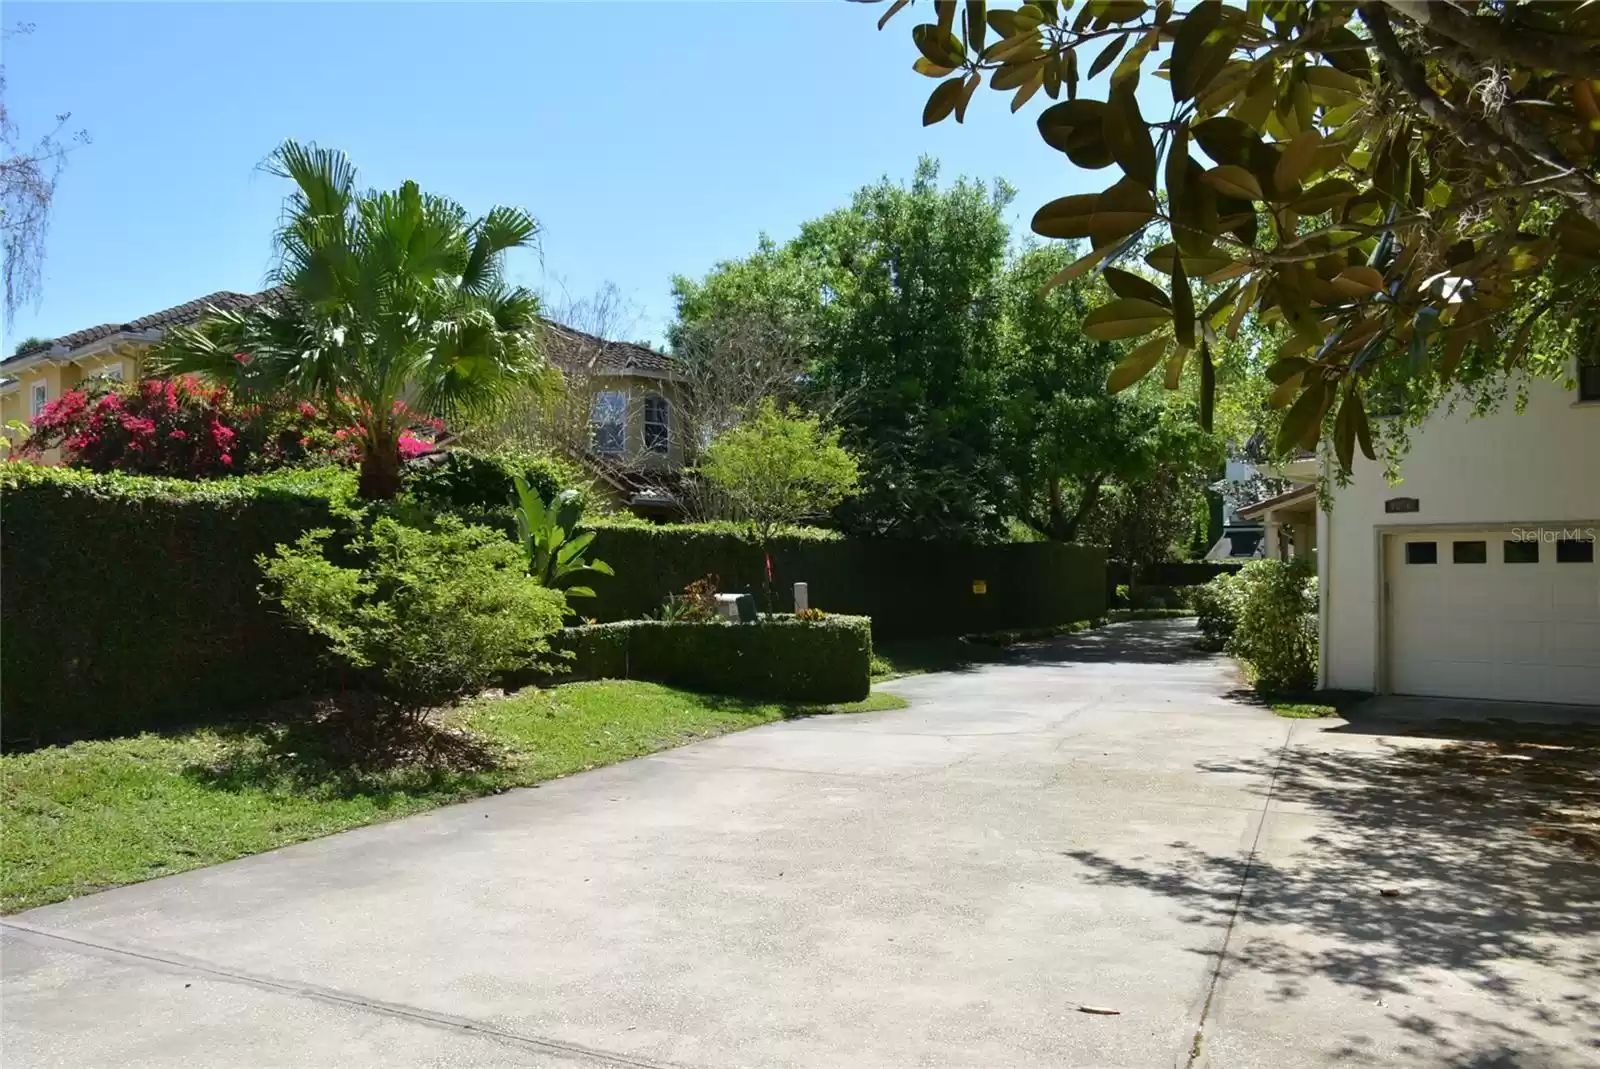 This lushly landscaped community provides a tucked away feel all while being close to Winter Park dining and shopping!